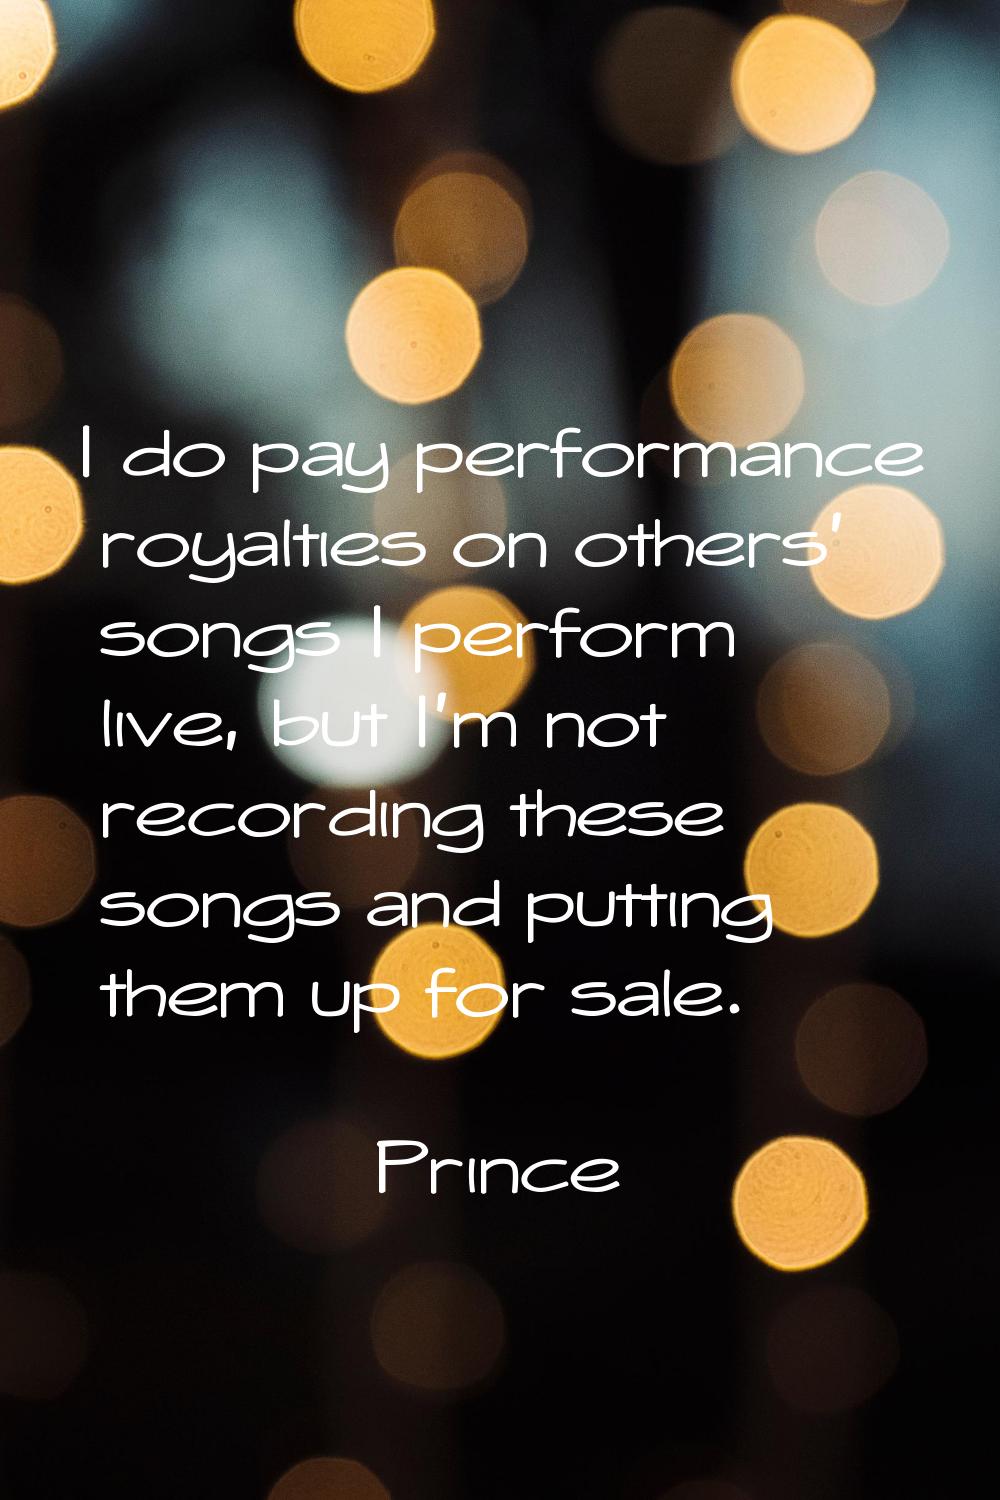 I do pay performance royalties on others' songs I perform live, but I'm not recording these songs a